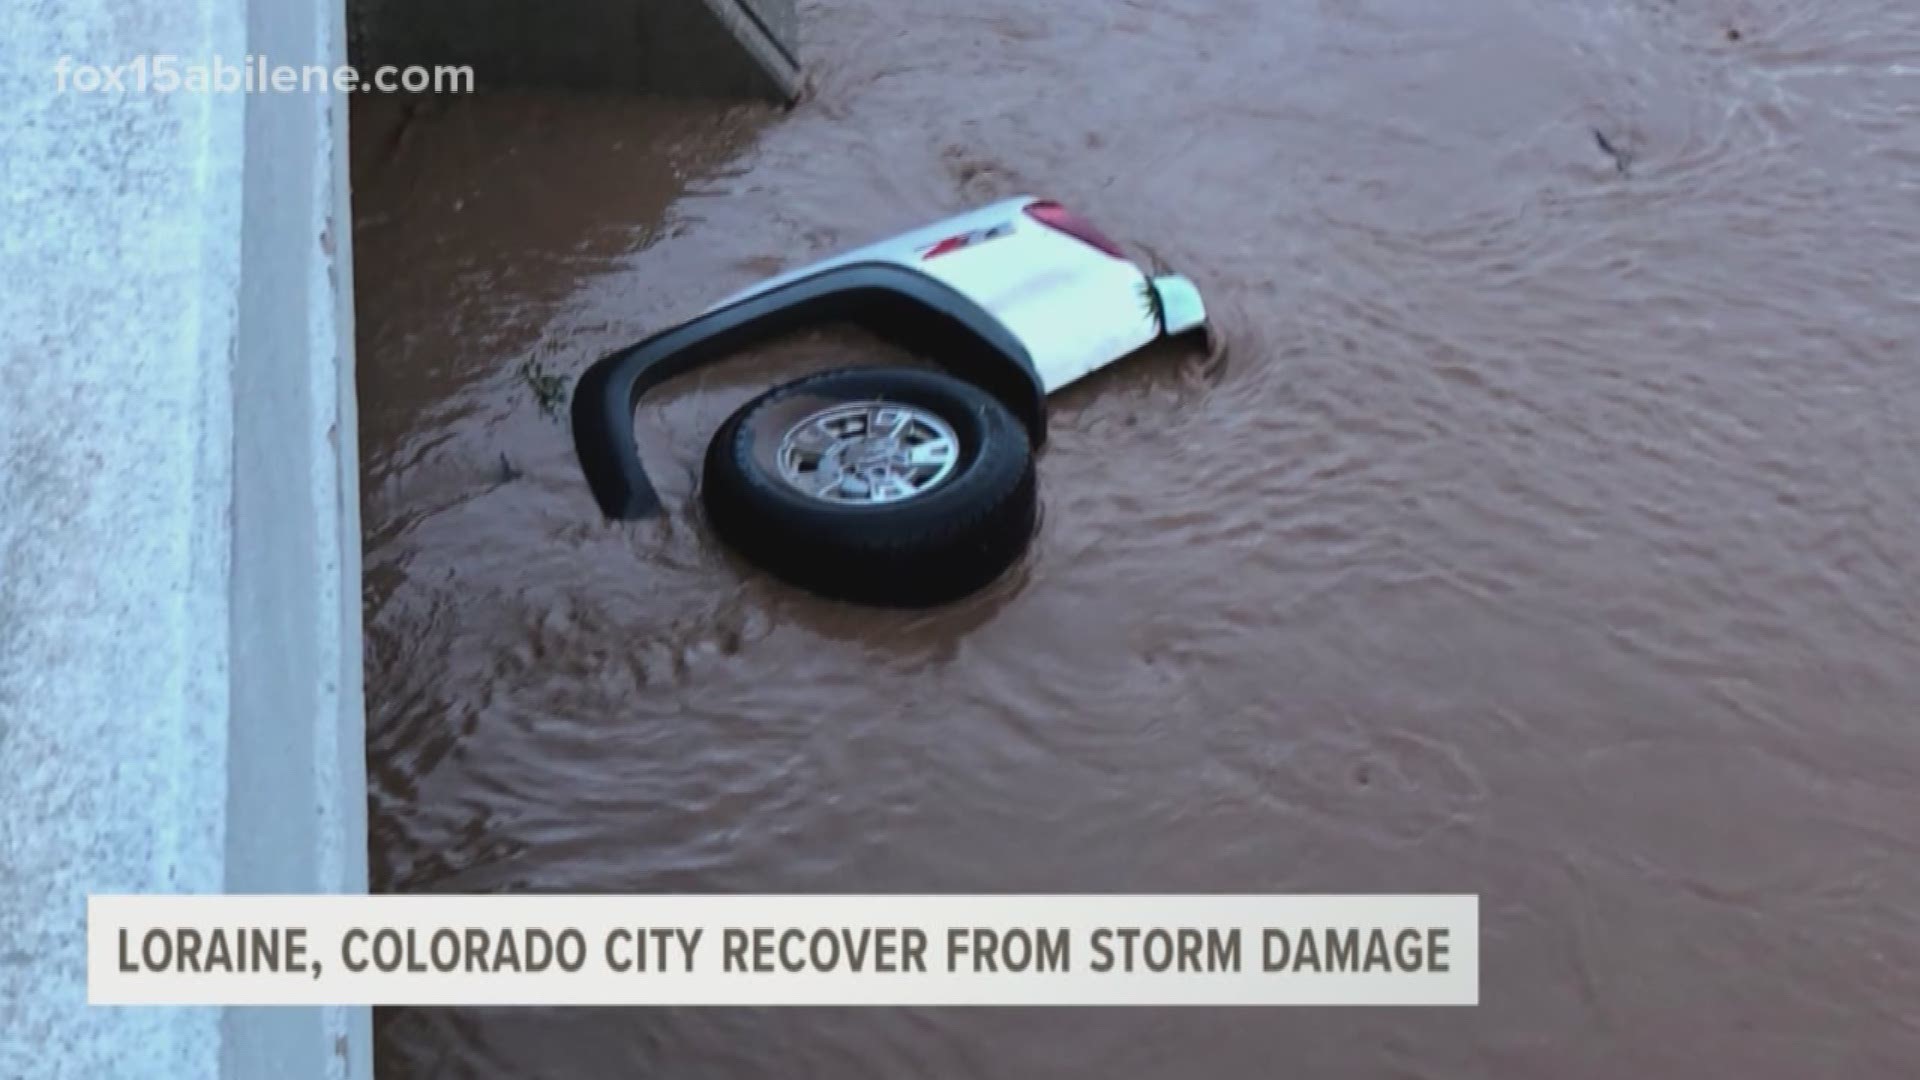 Last week's storm left a lot of damage behind in Loraine and Colorado City.